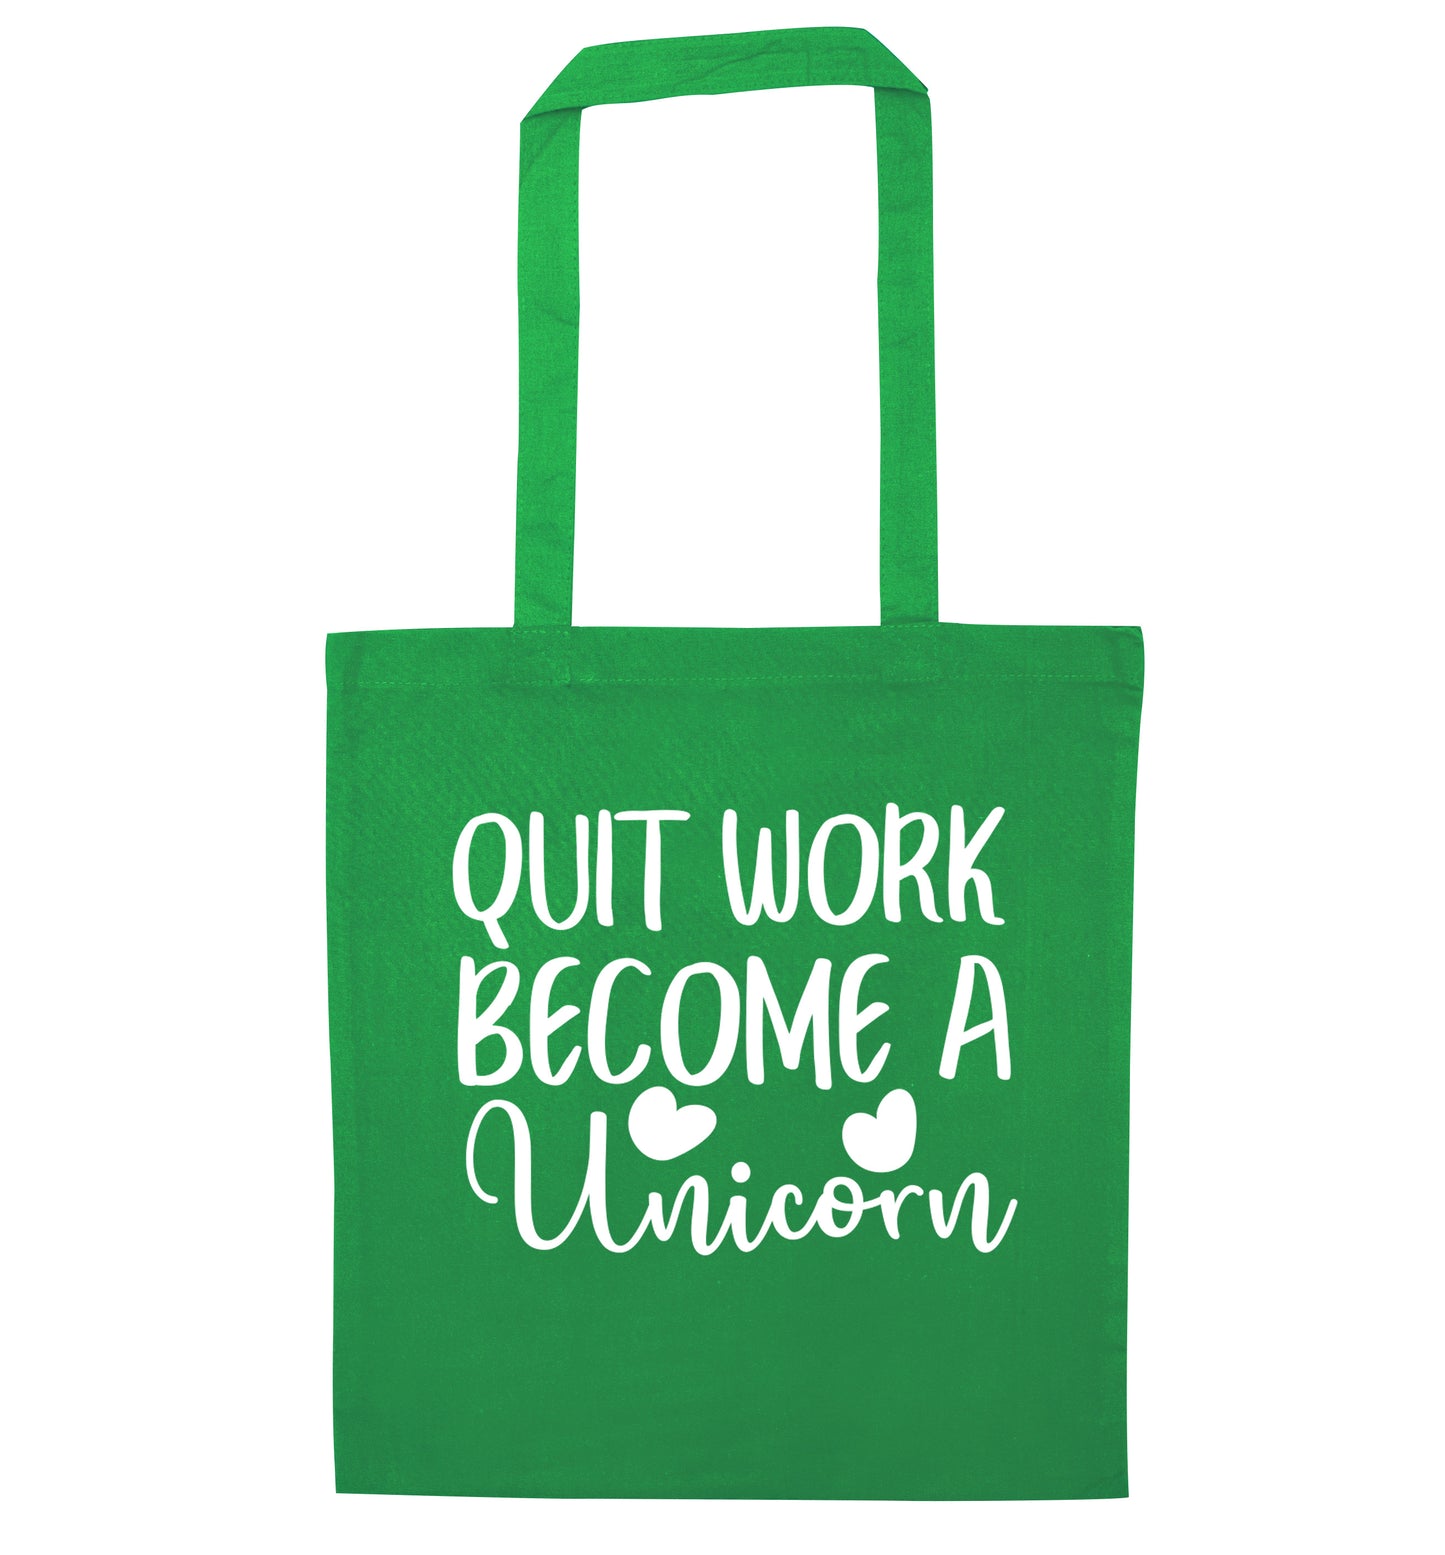 Quit work become a unicorn green tote bag